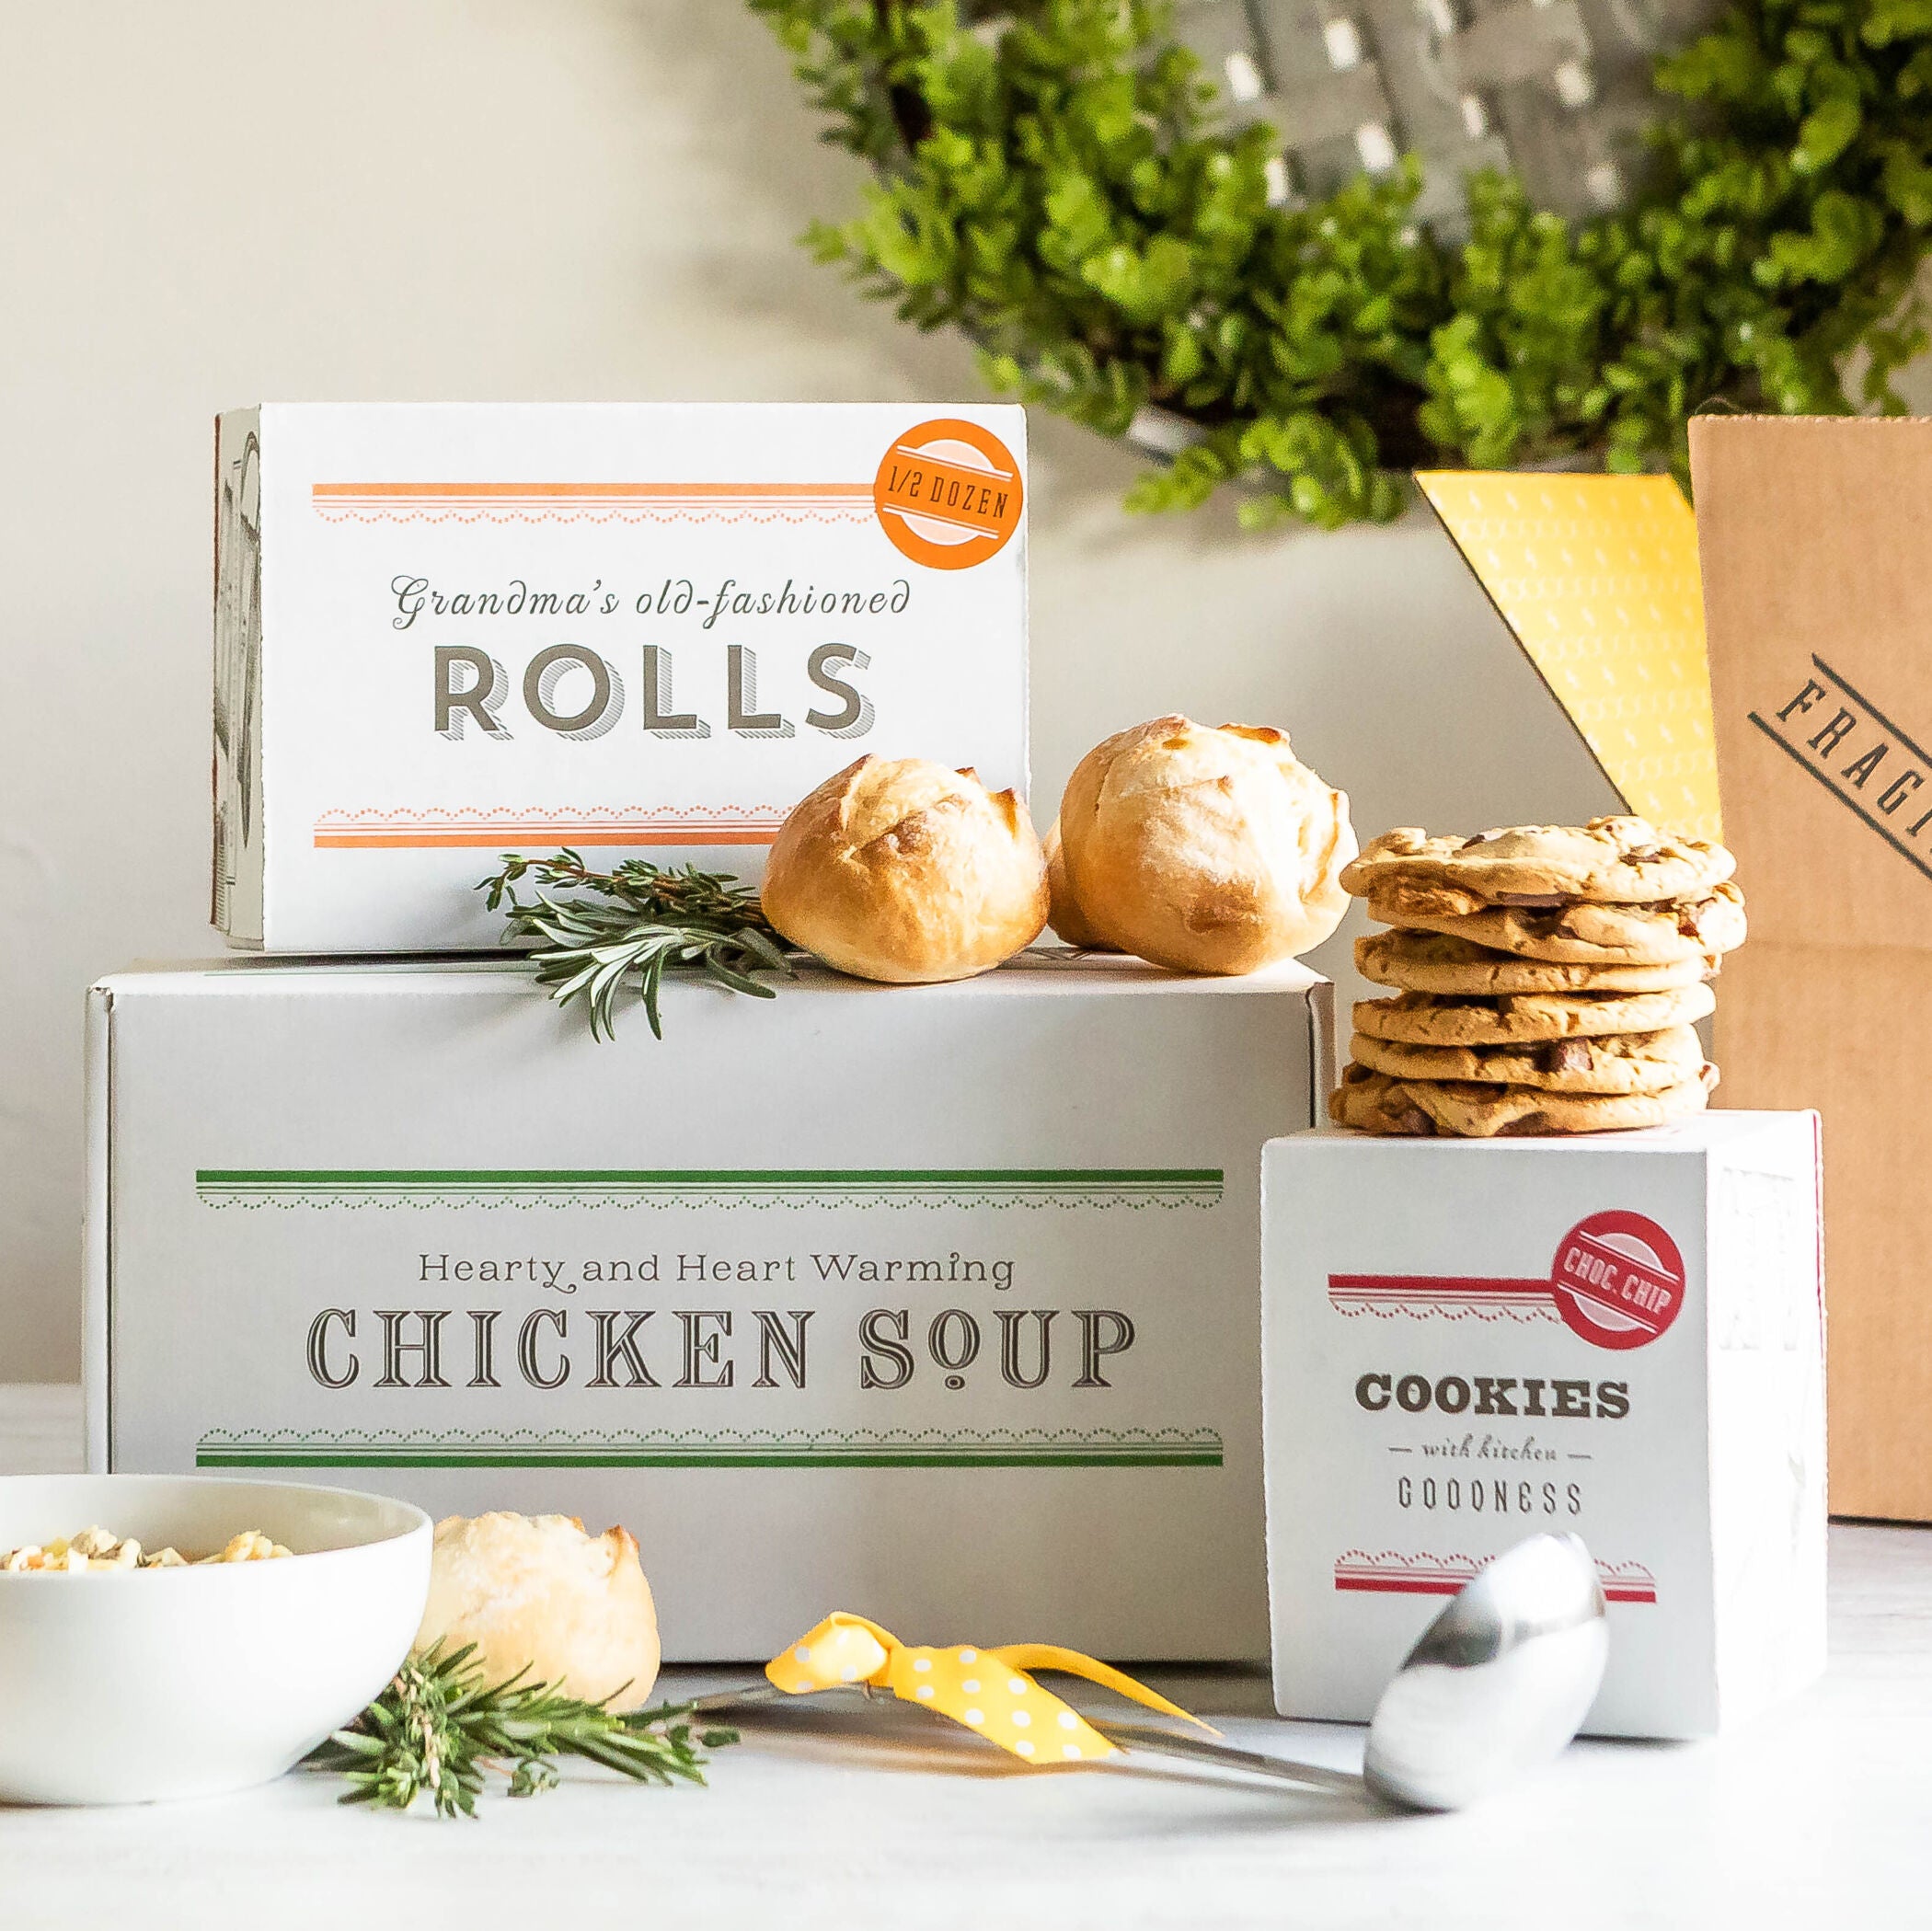 Stacked boxes of Spoonful of Comfort's gluten-free garden vegetable soup, cookies, and rolls.